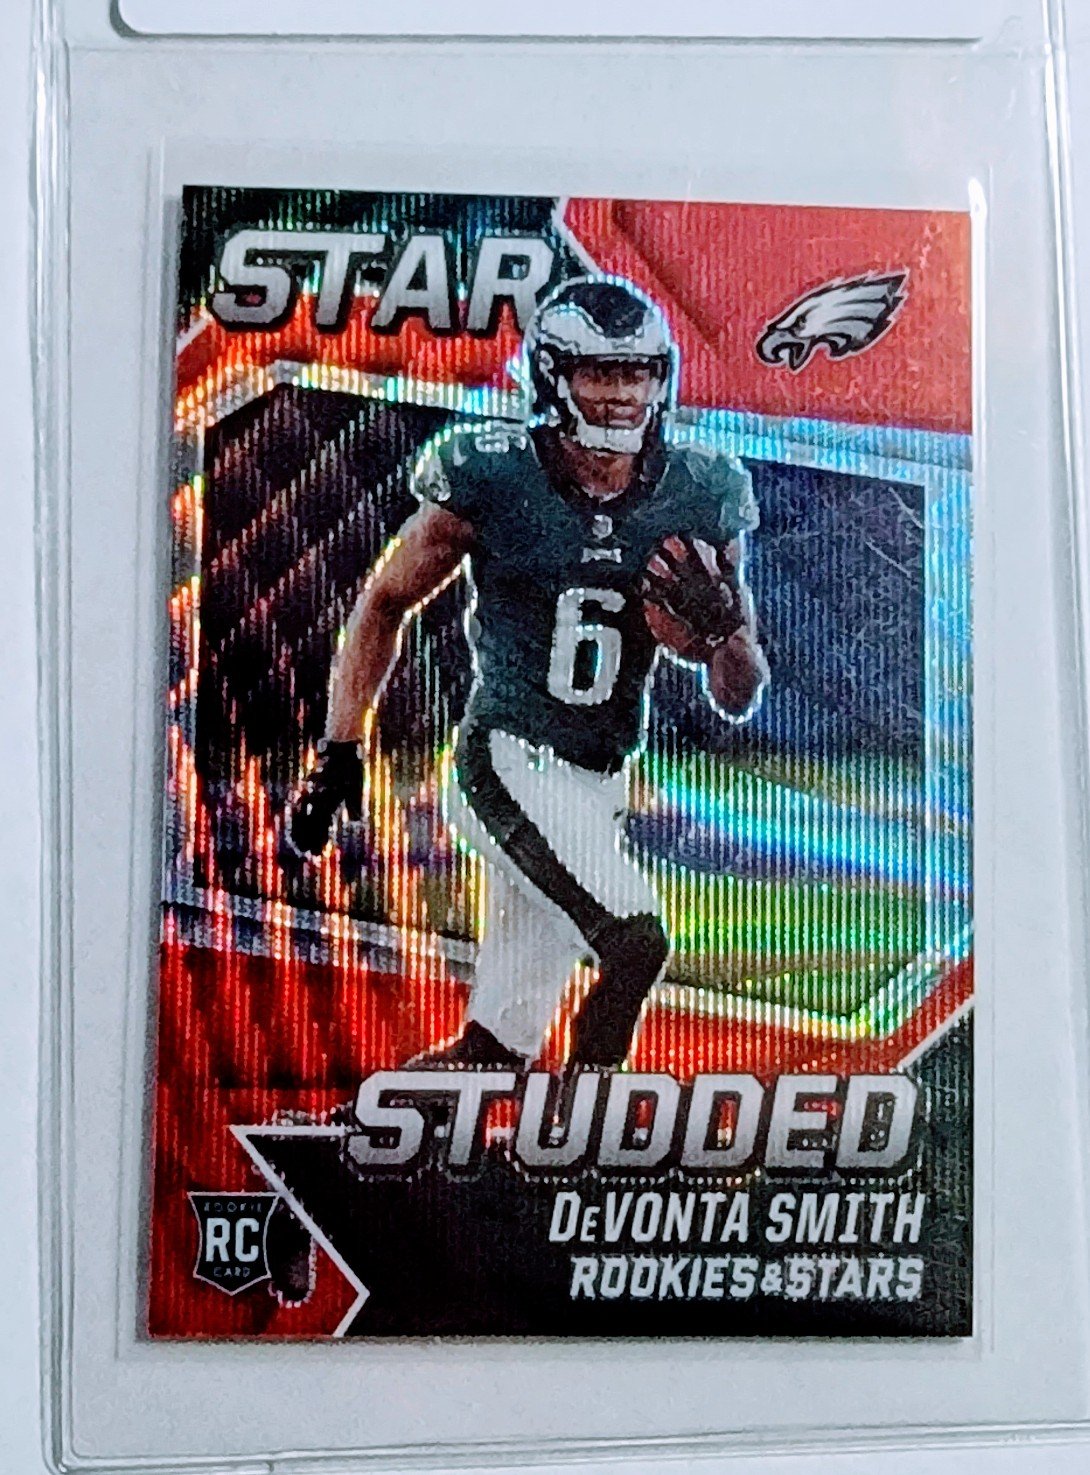 2021 Panini Rookies and Stars DeVonta Smith Star Studded Insert Refractor Rookie Football Card AVM1 simple Xclusive Collectibles   